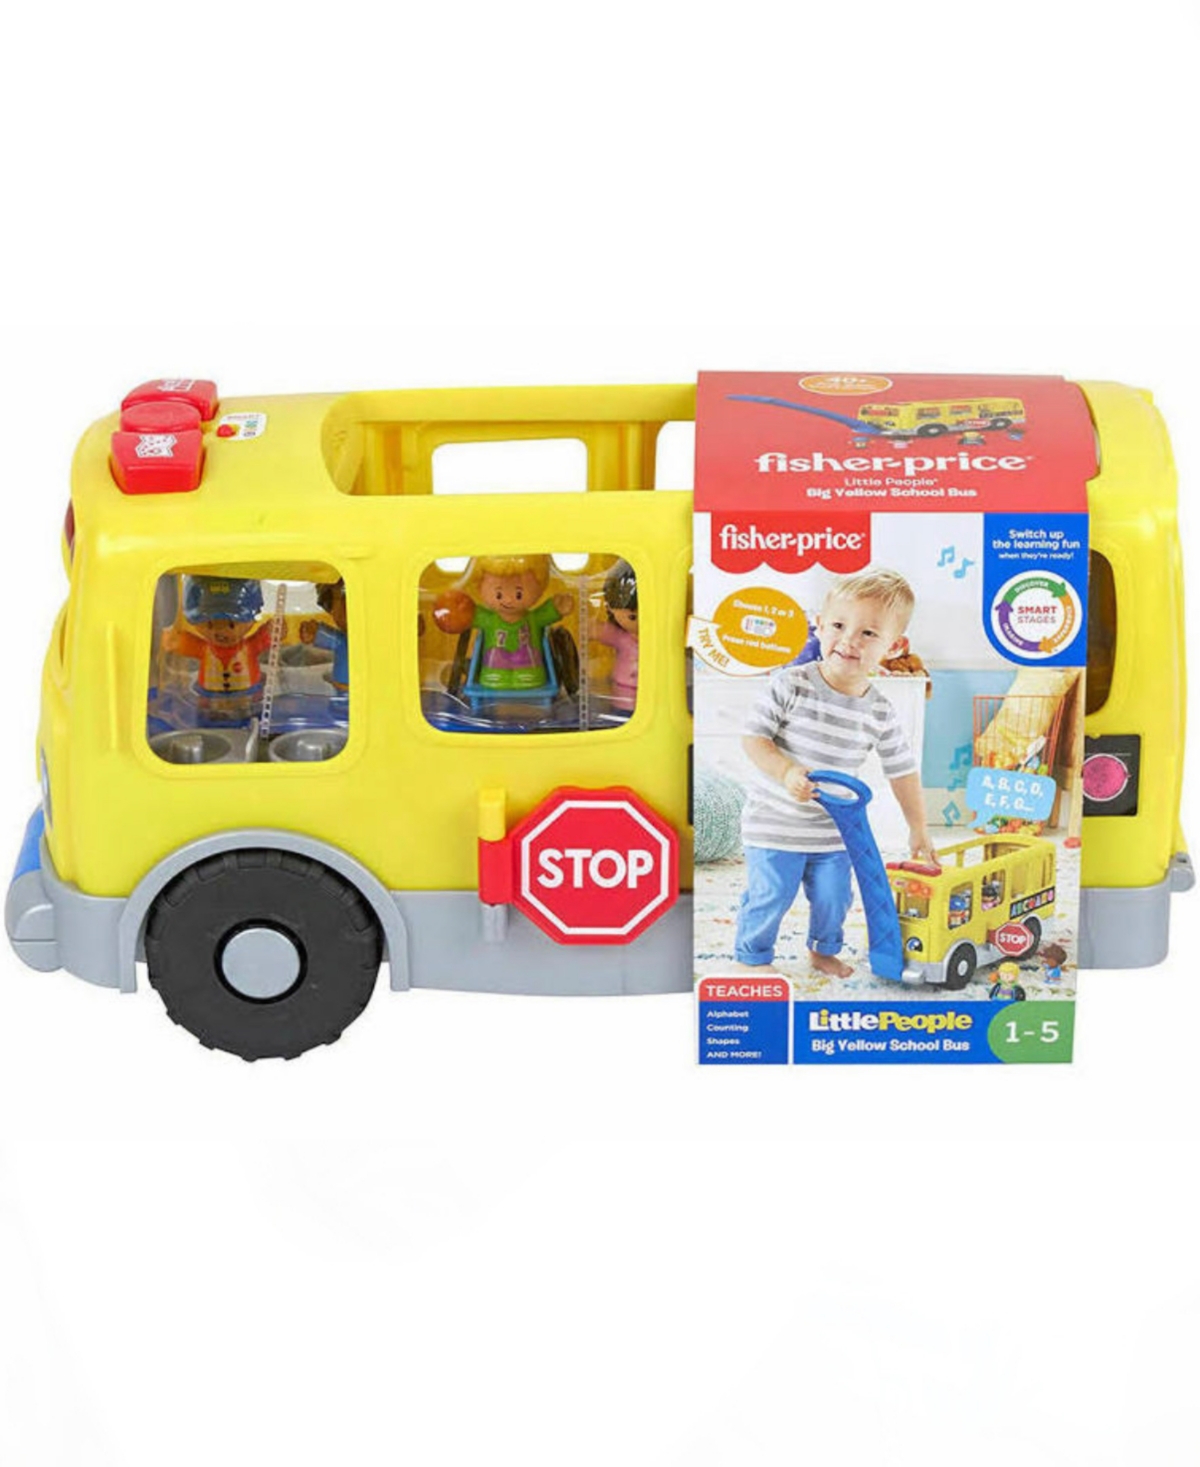 Shop Fisher Price Time For The Big Kid Friendly, Singing With Friends School Bus In Multi Colored Plastic